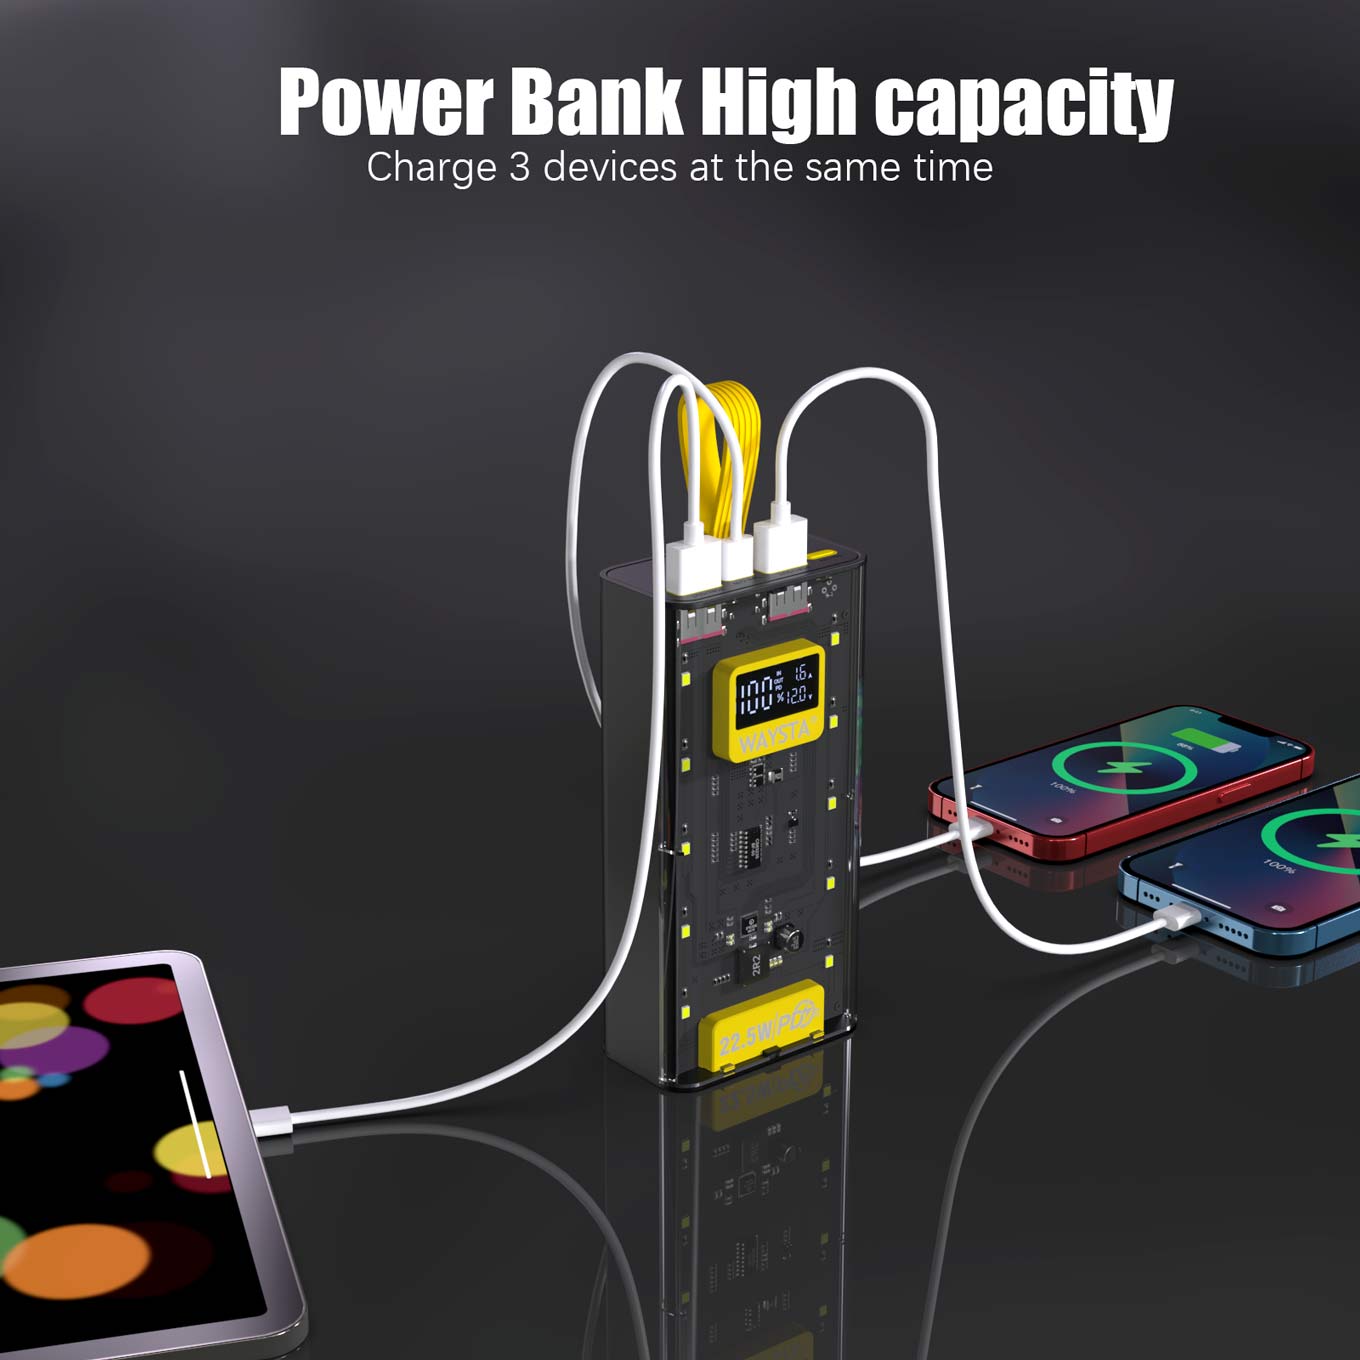 Power Bank 26800mAh, QC 3.0 22.5W and PD 20W Fast Charge, Powerbank, External Battery Pack, TYPE-C input/output Portable Charger for iphone, ipad, Samsung Galaxy, Huawei, Smartphones etc.